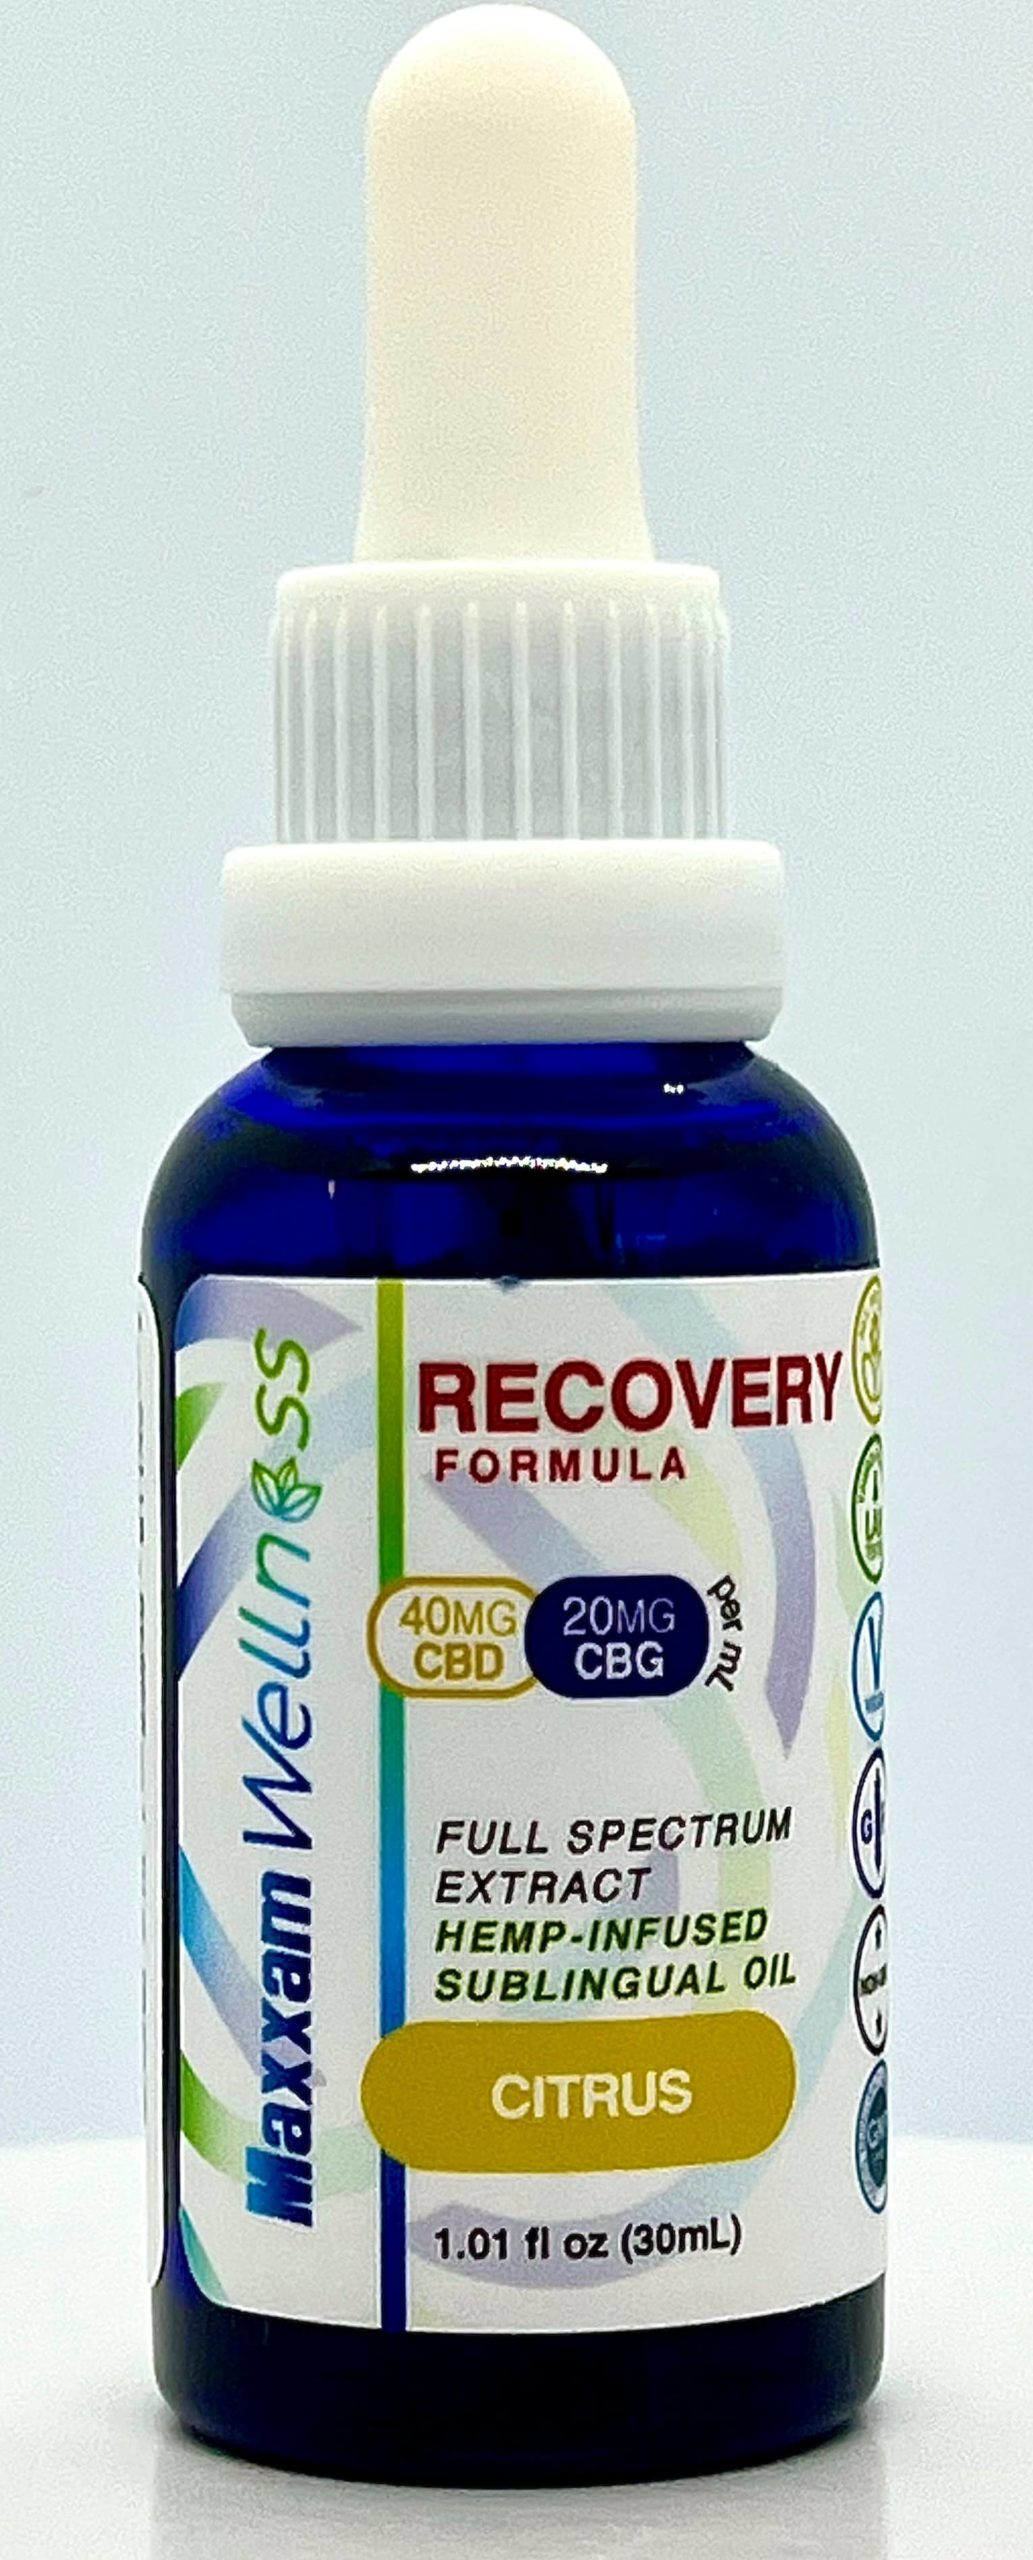 Recovery Tincture